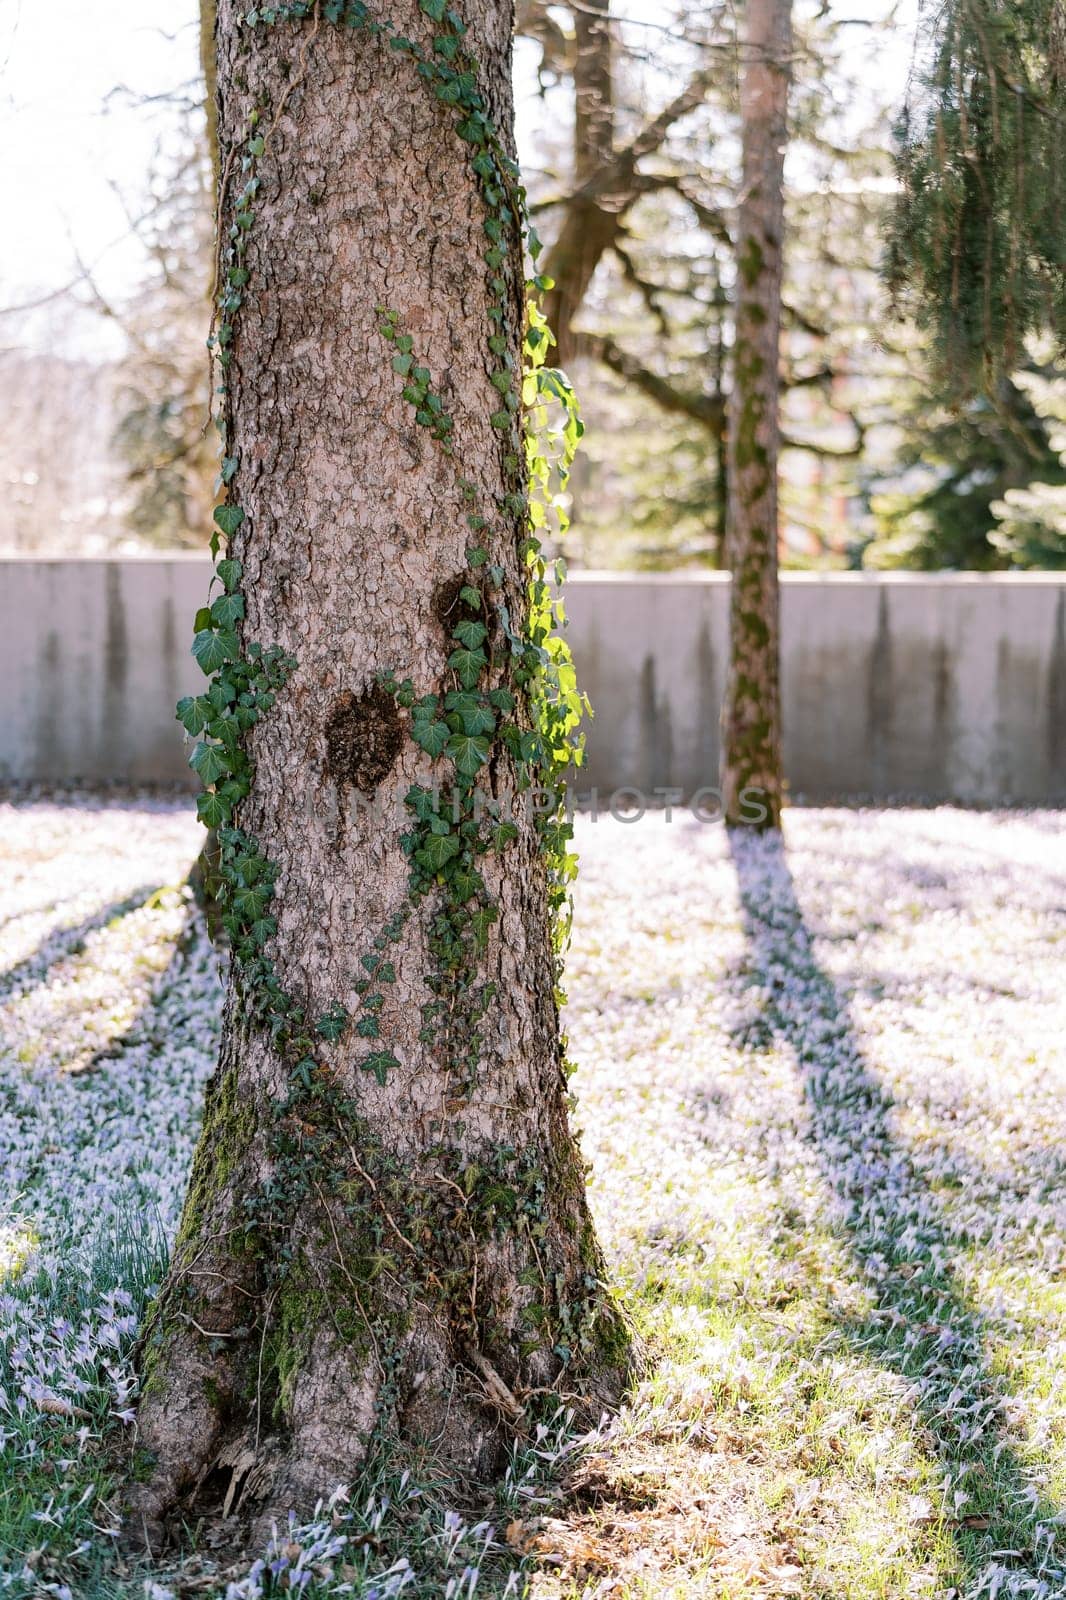 Pine overgrown with green ivy in a clearing among blooming blue crocuses. High quality photo